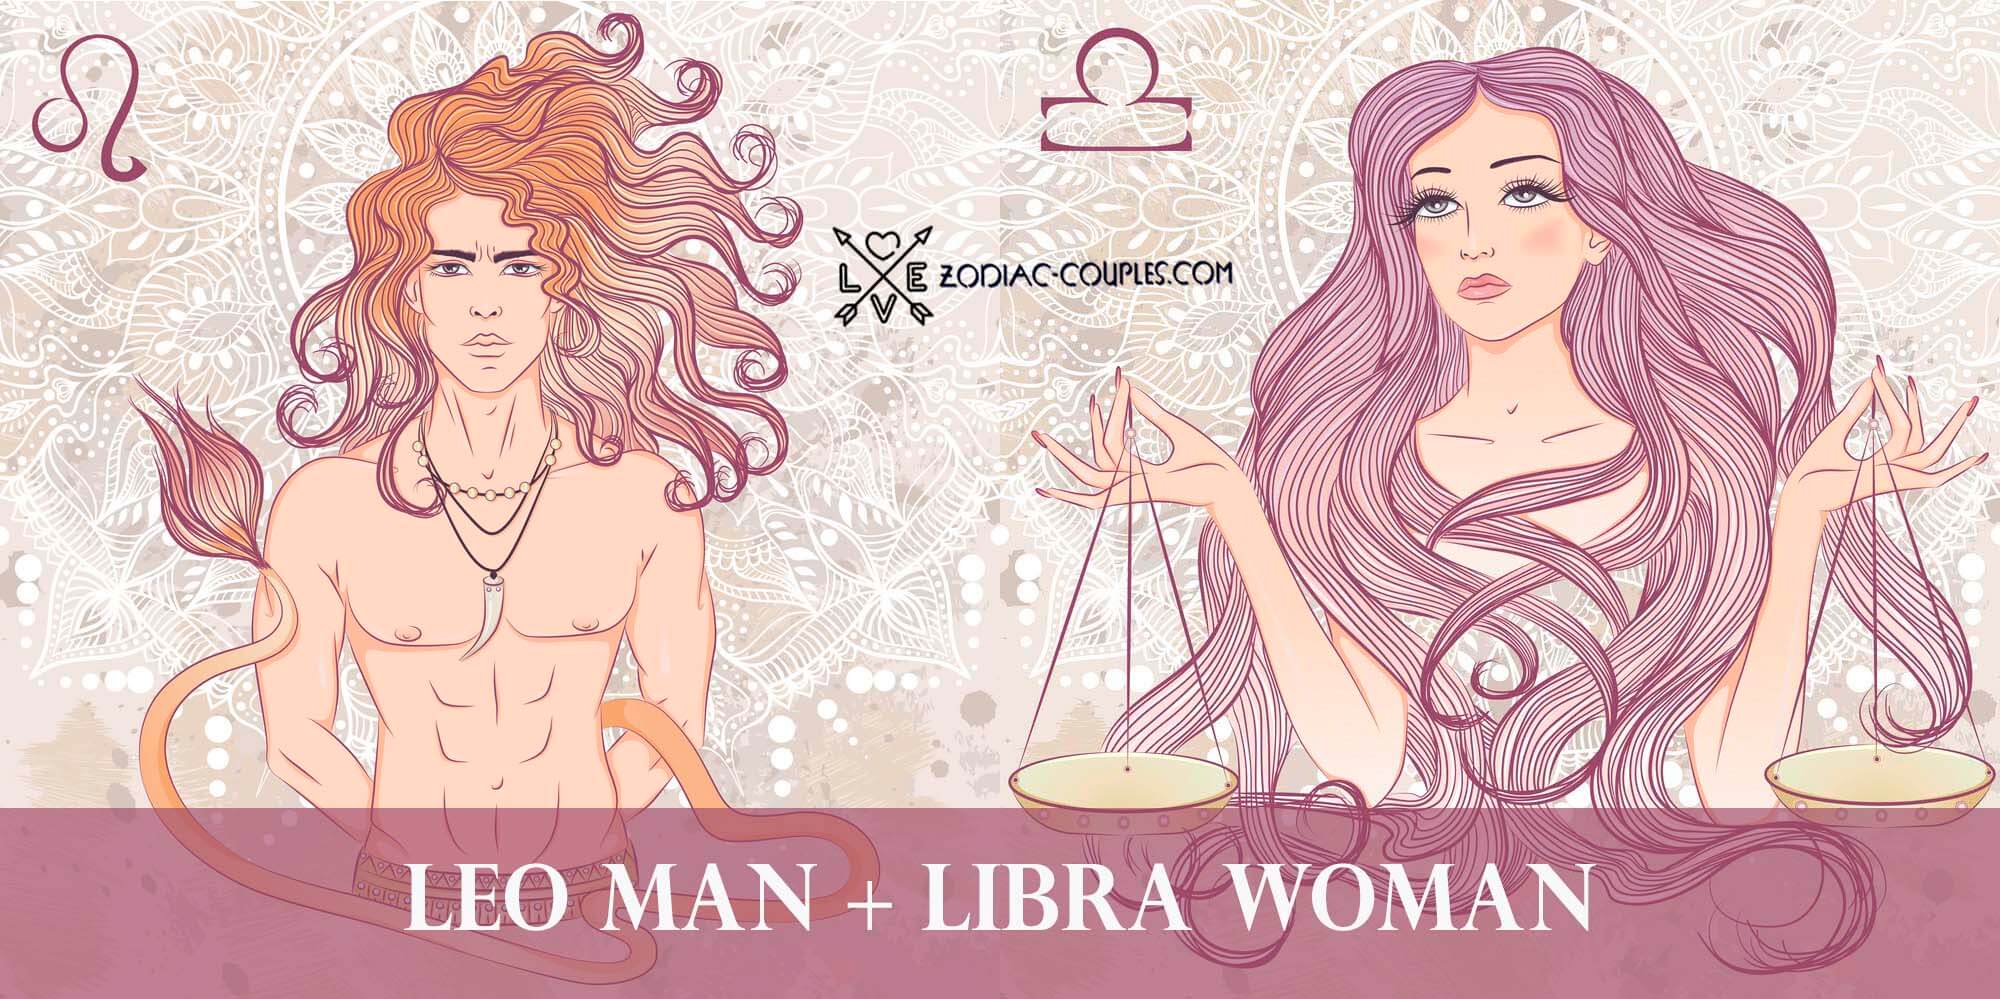 Leo man and Libra woman: Celebrity Couples and Compatibility